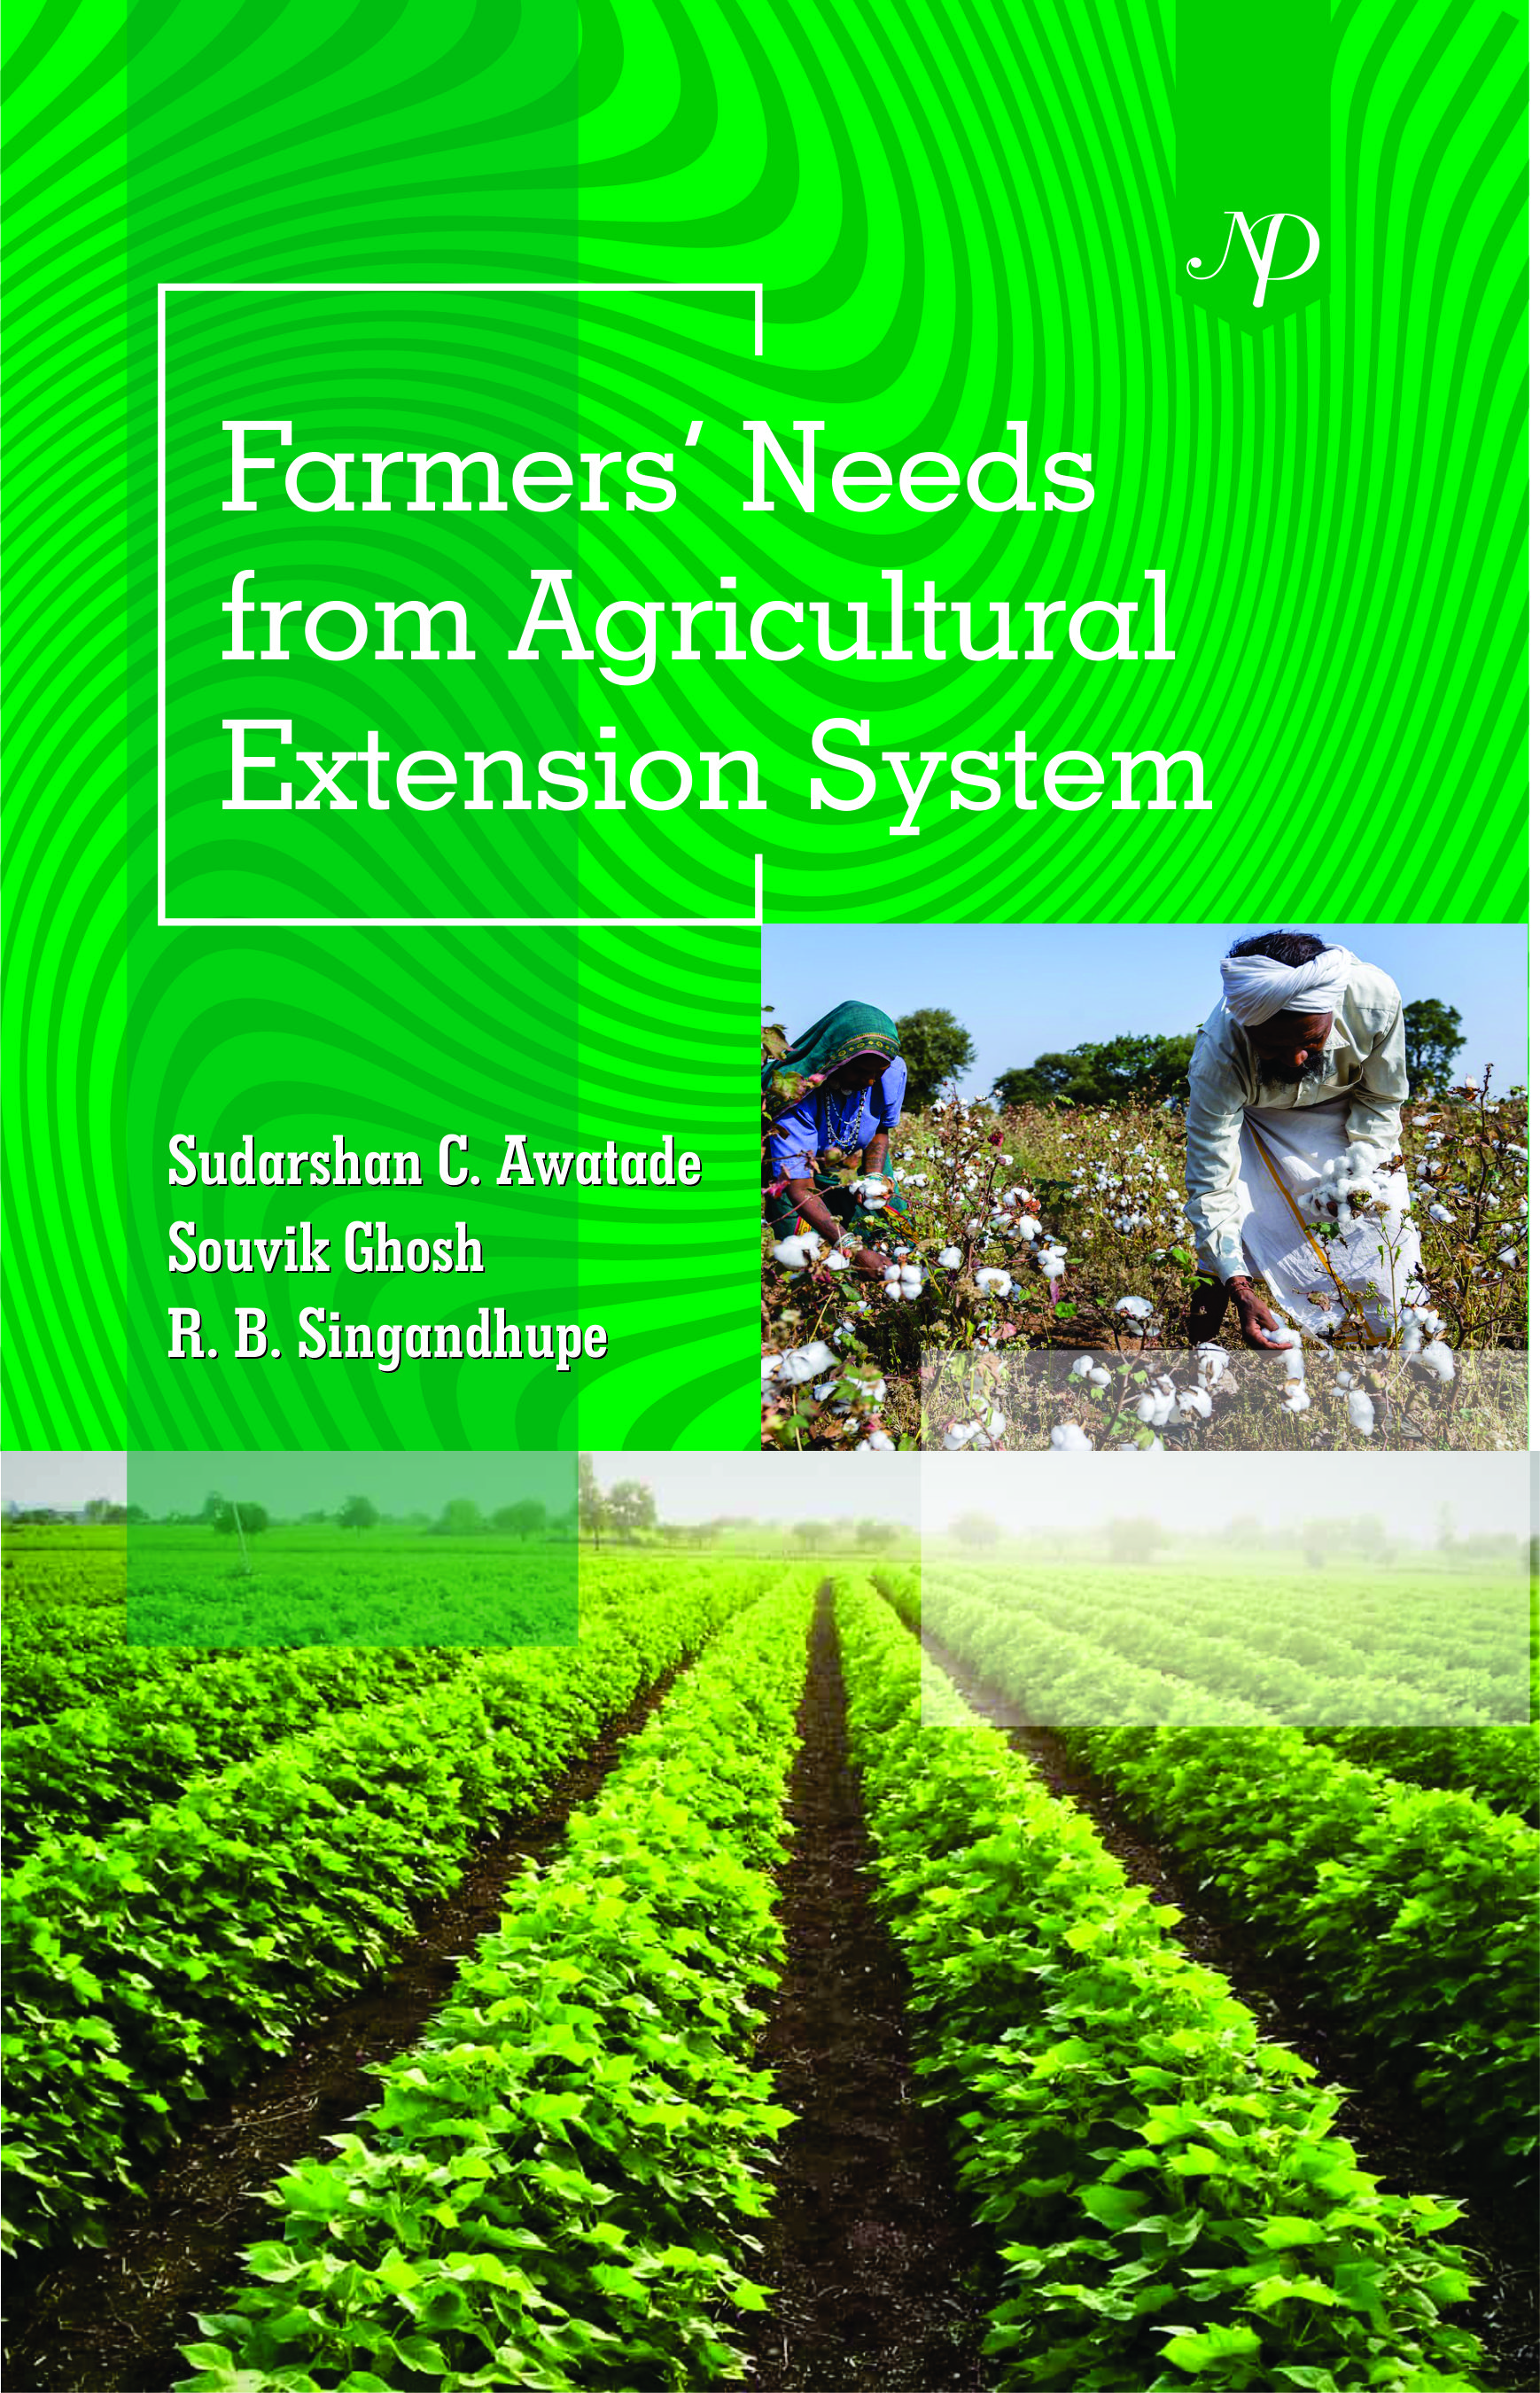 Farmers' Needs from Agricultural Extension System